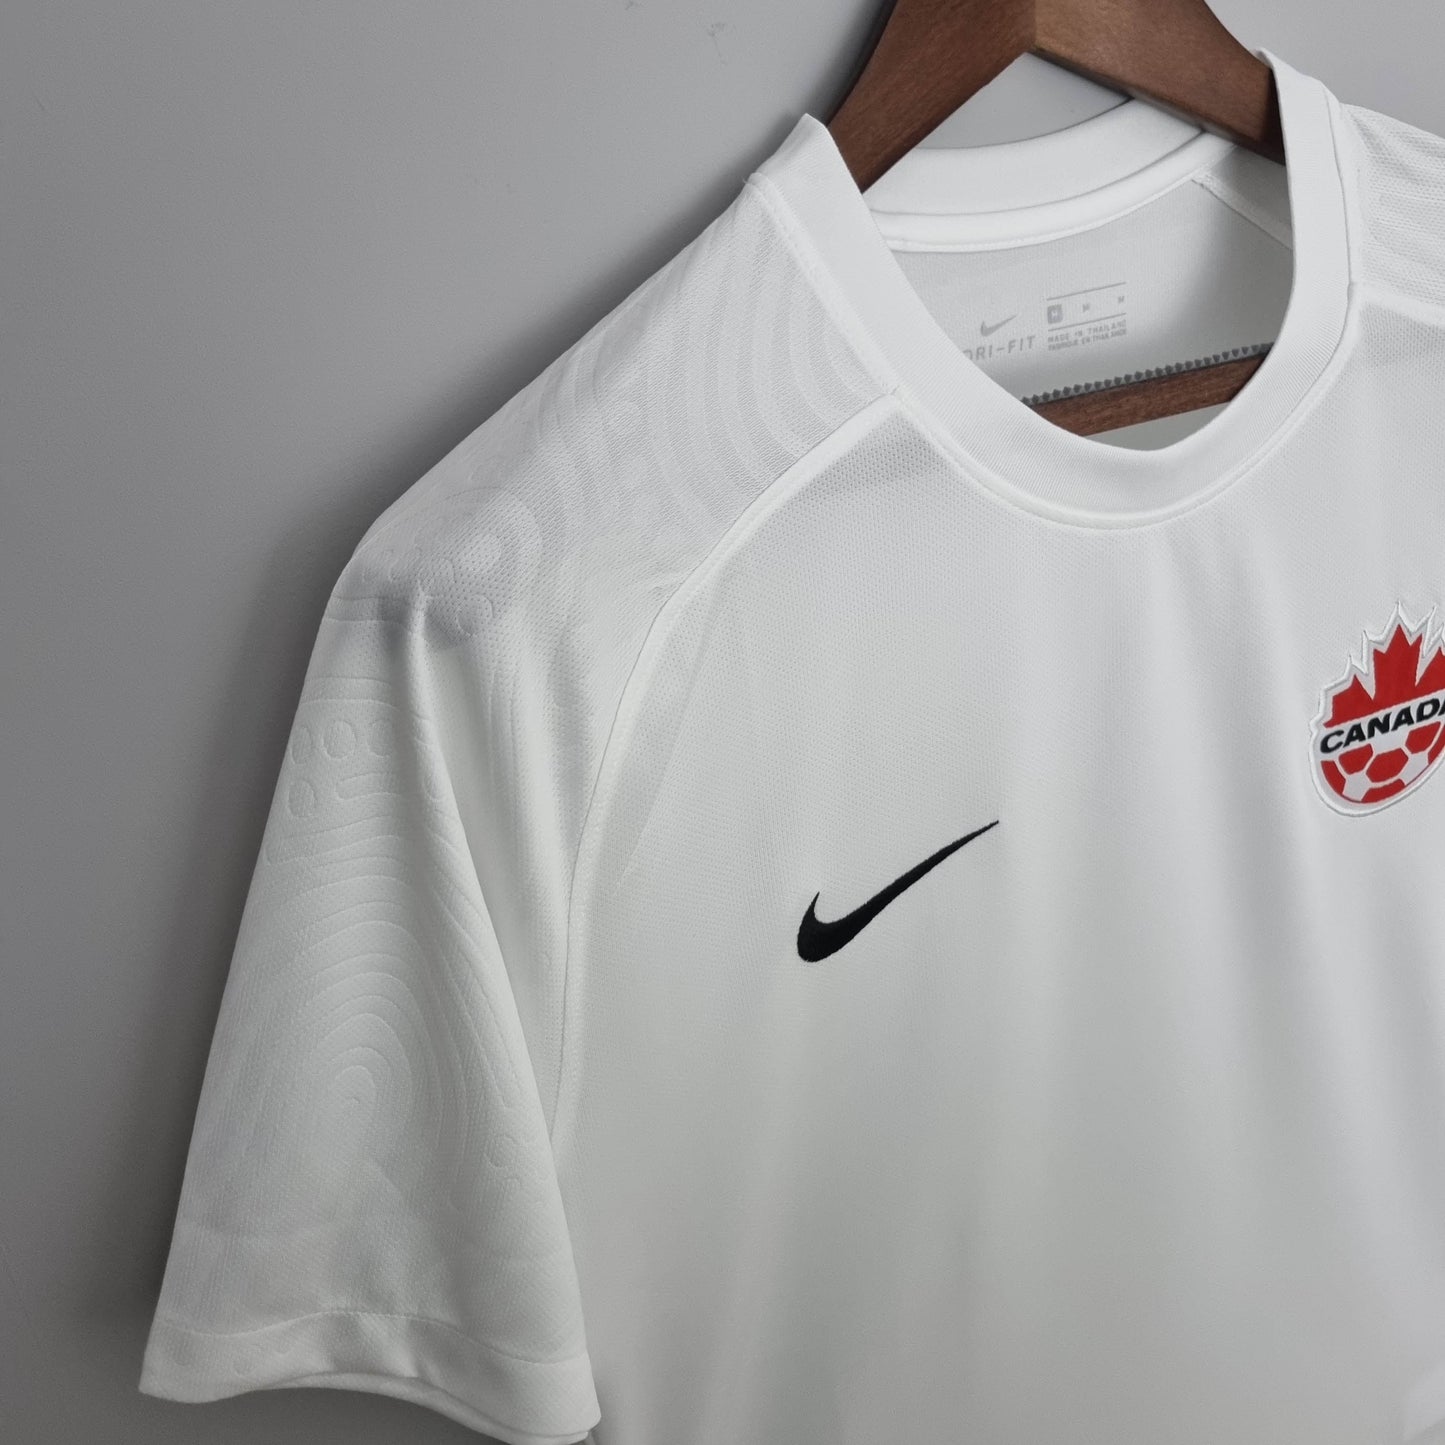 2022 FIFA World Cup Canada National Team Away Soccer Jersey